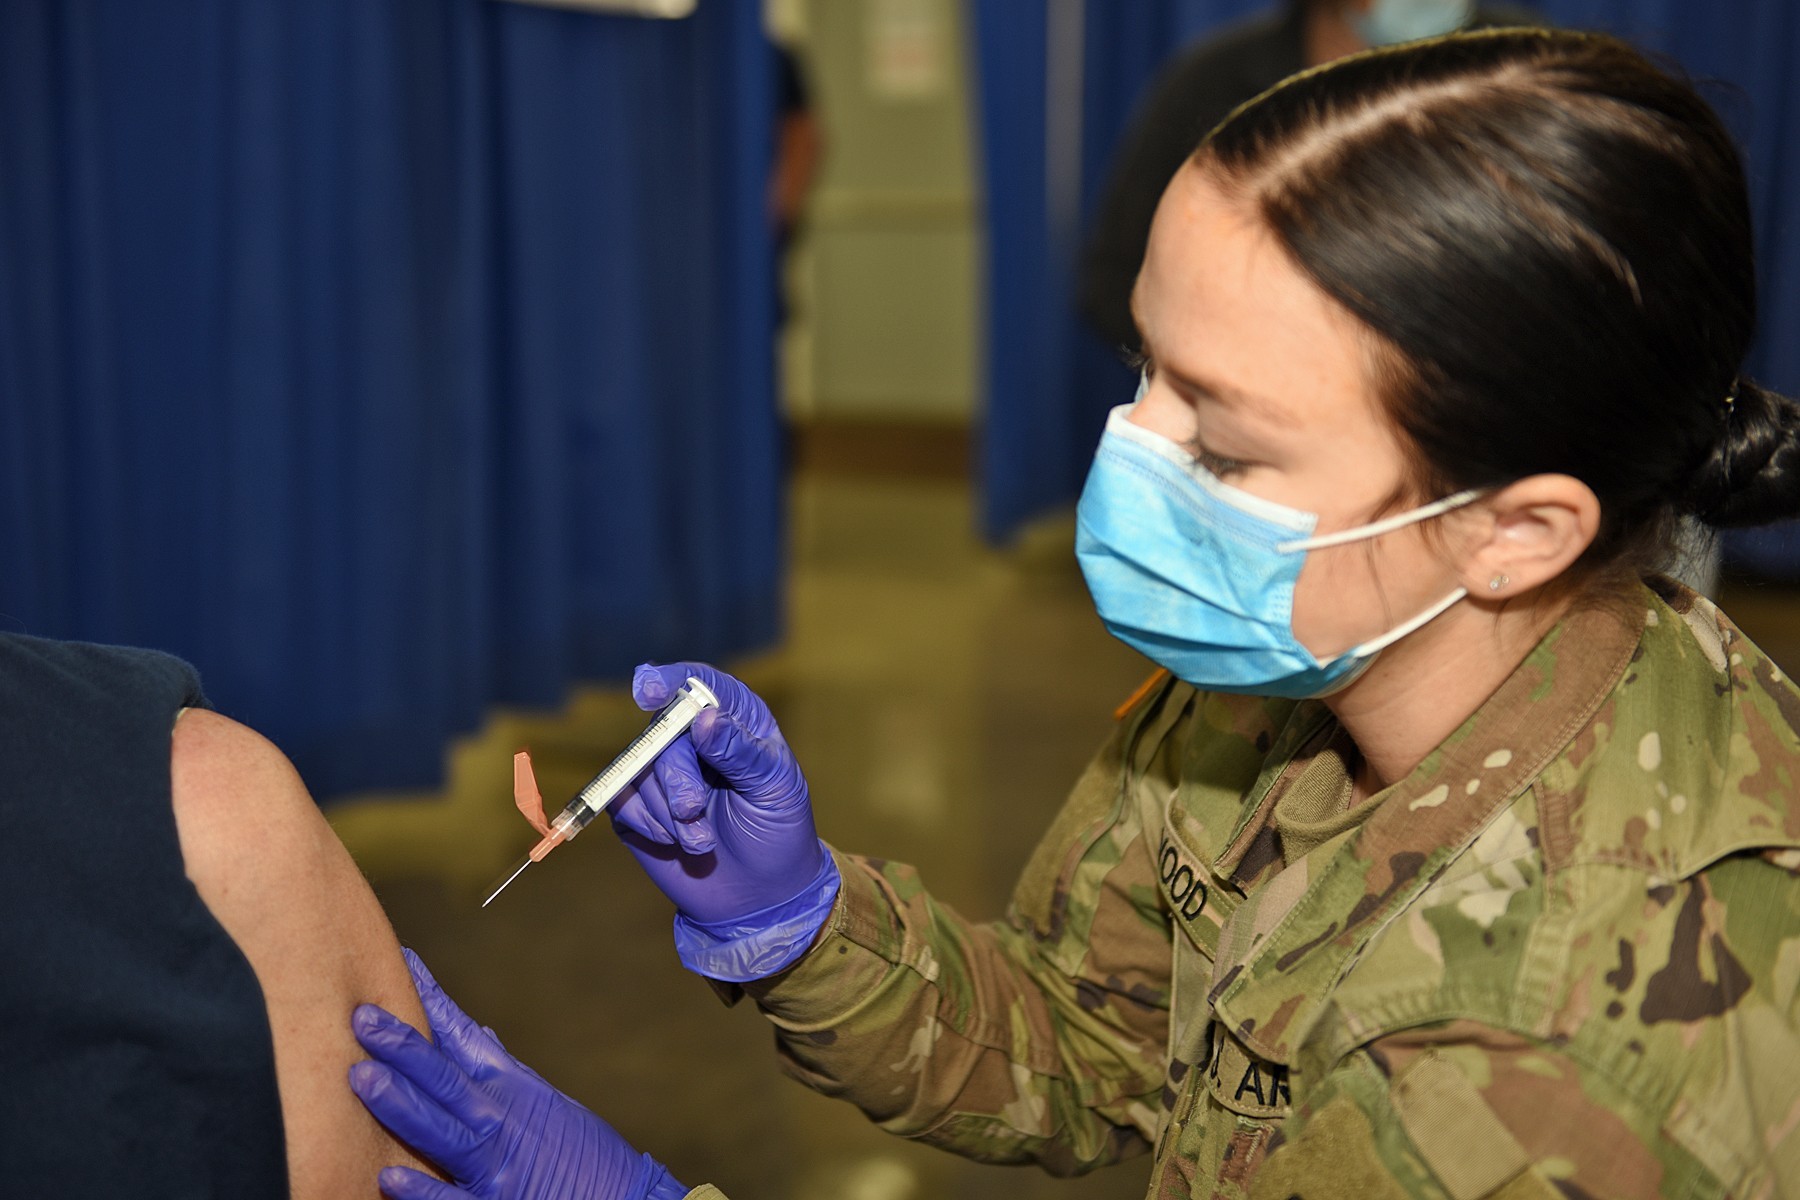 Ming Assists Large-scale Vaccination Clinic At Fairgrounds Article The United States Army